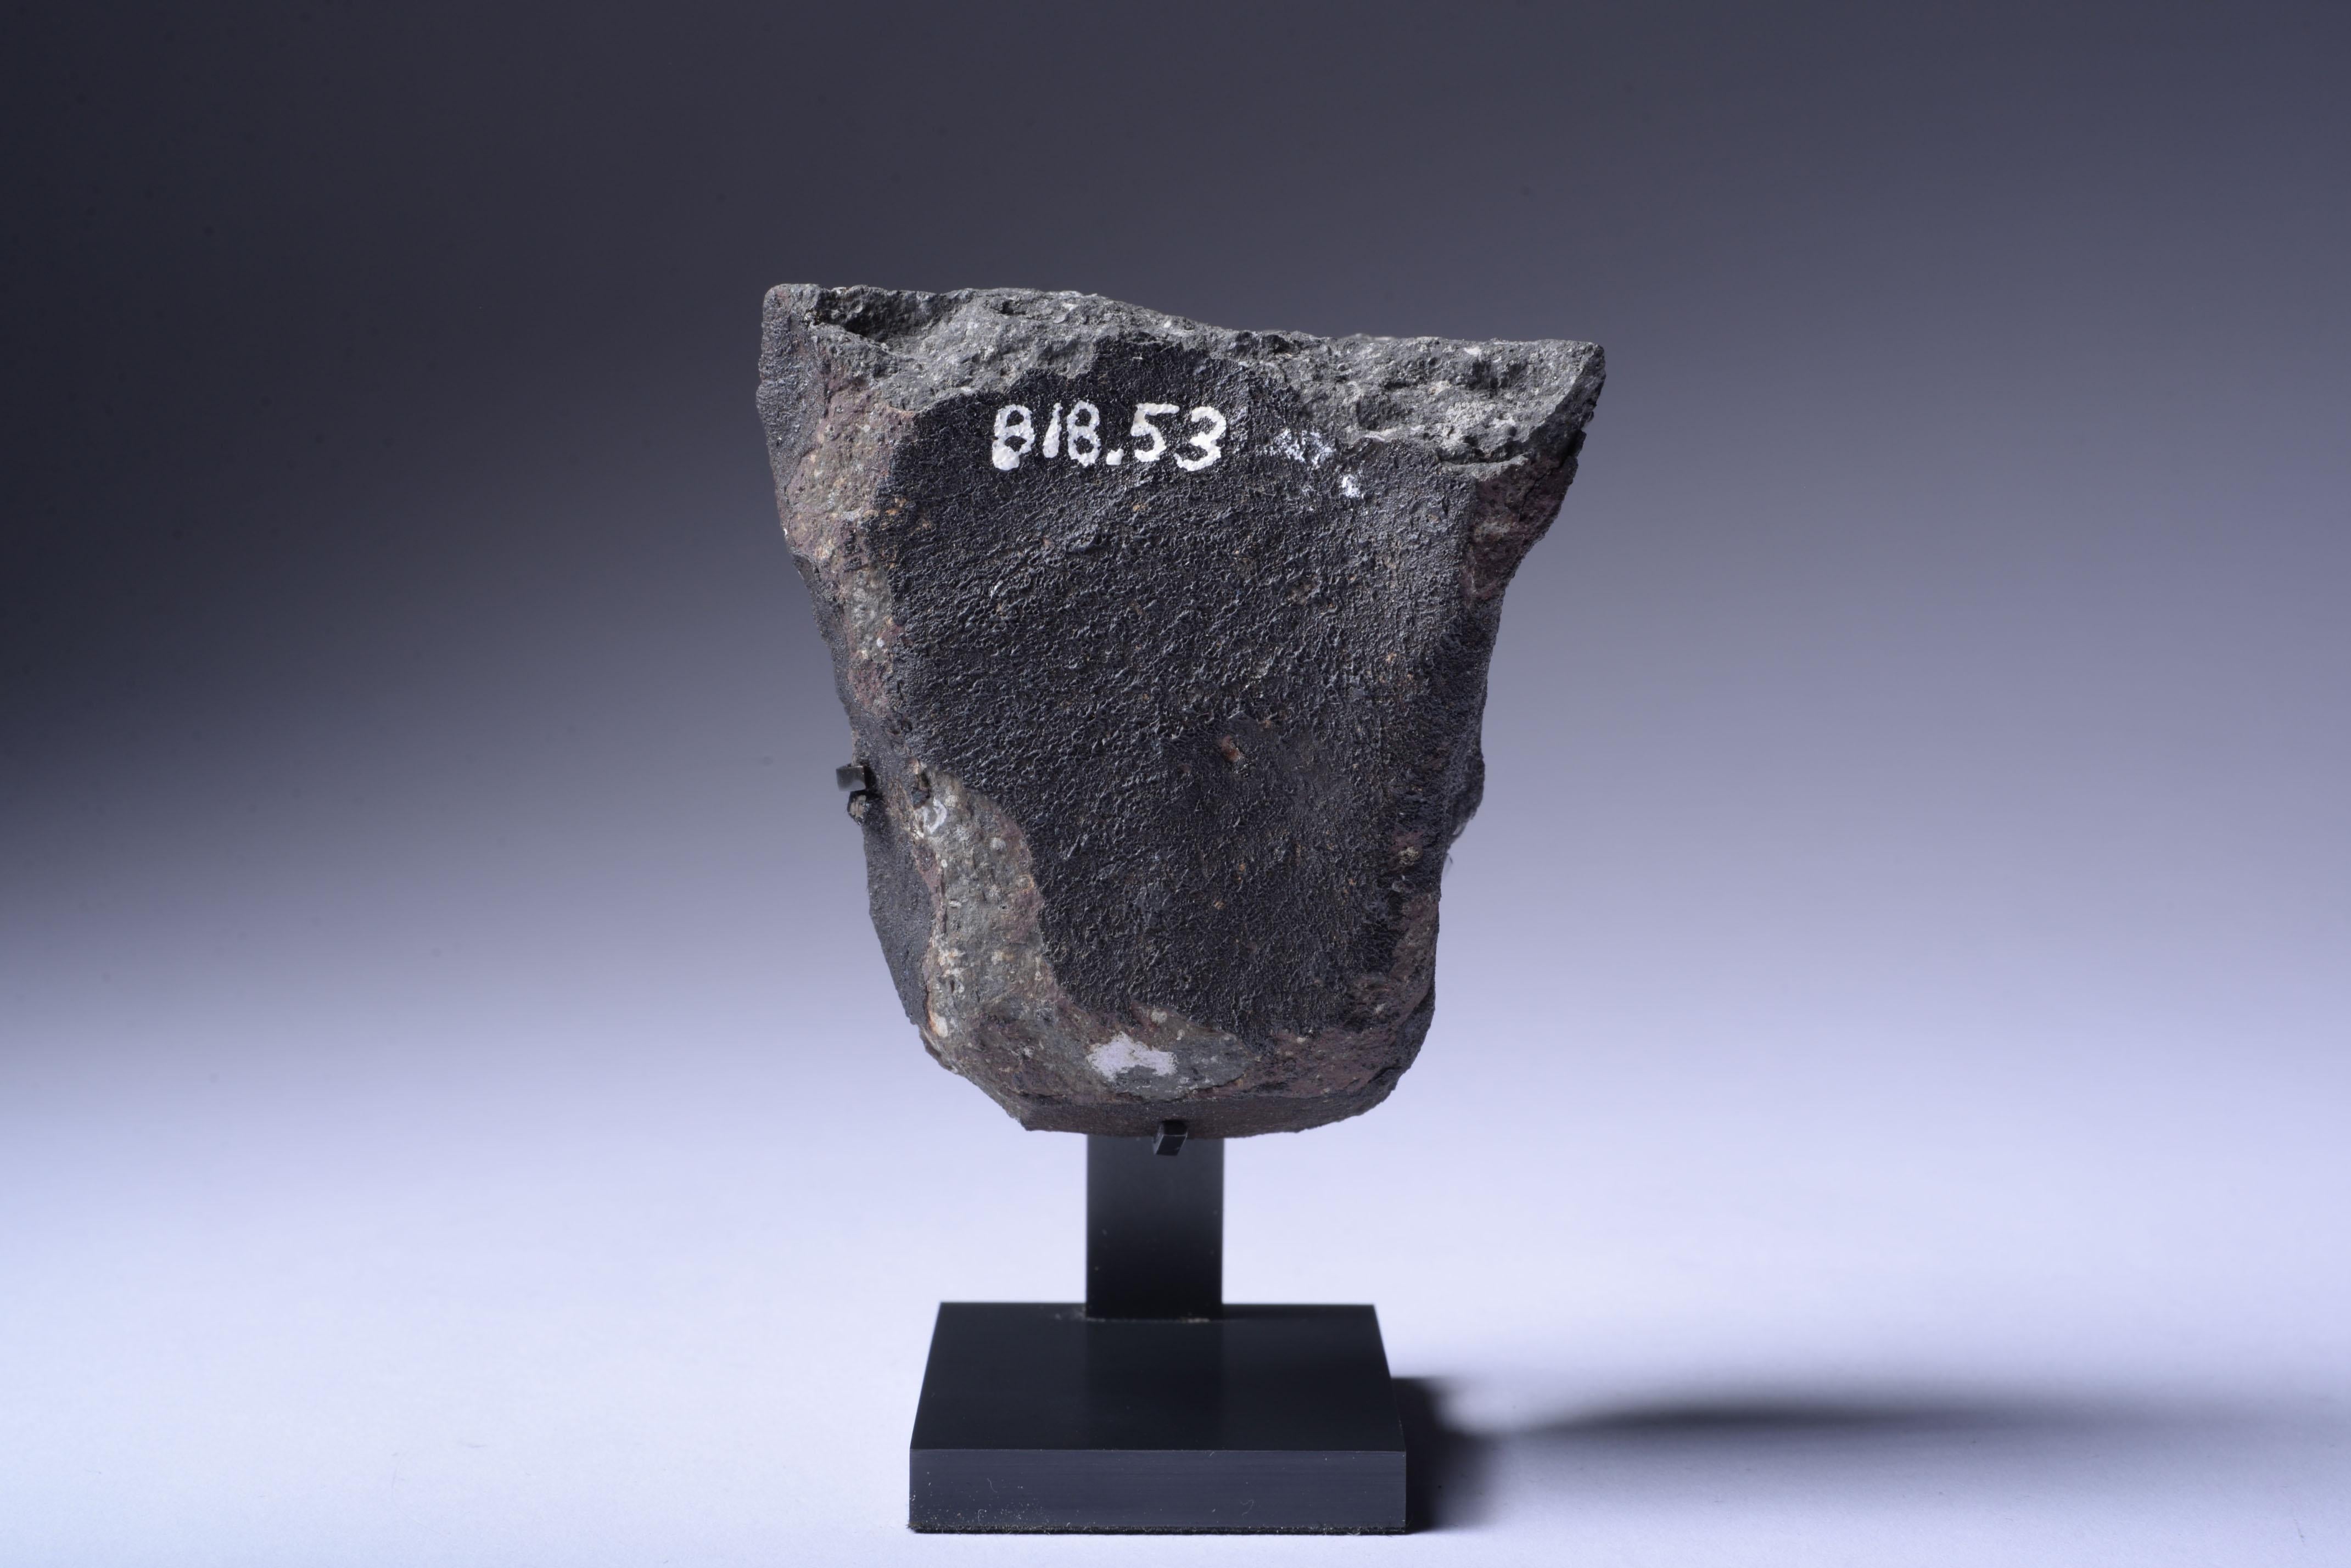 Pre-Solar Stardust - A piece of the Allende Meteorite
Carbonaceous Chondrite - CV3
Height 6.98 cm
280 g

“This individual sample of the Allende CV3 carbonaceous chondrite shows an incomplete millimeter-thick fusion crust. In crust-free patches,